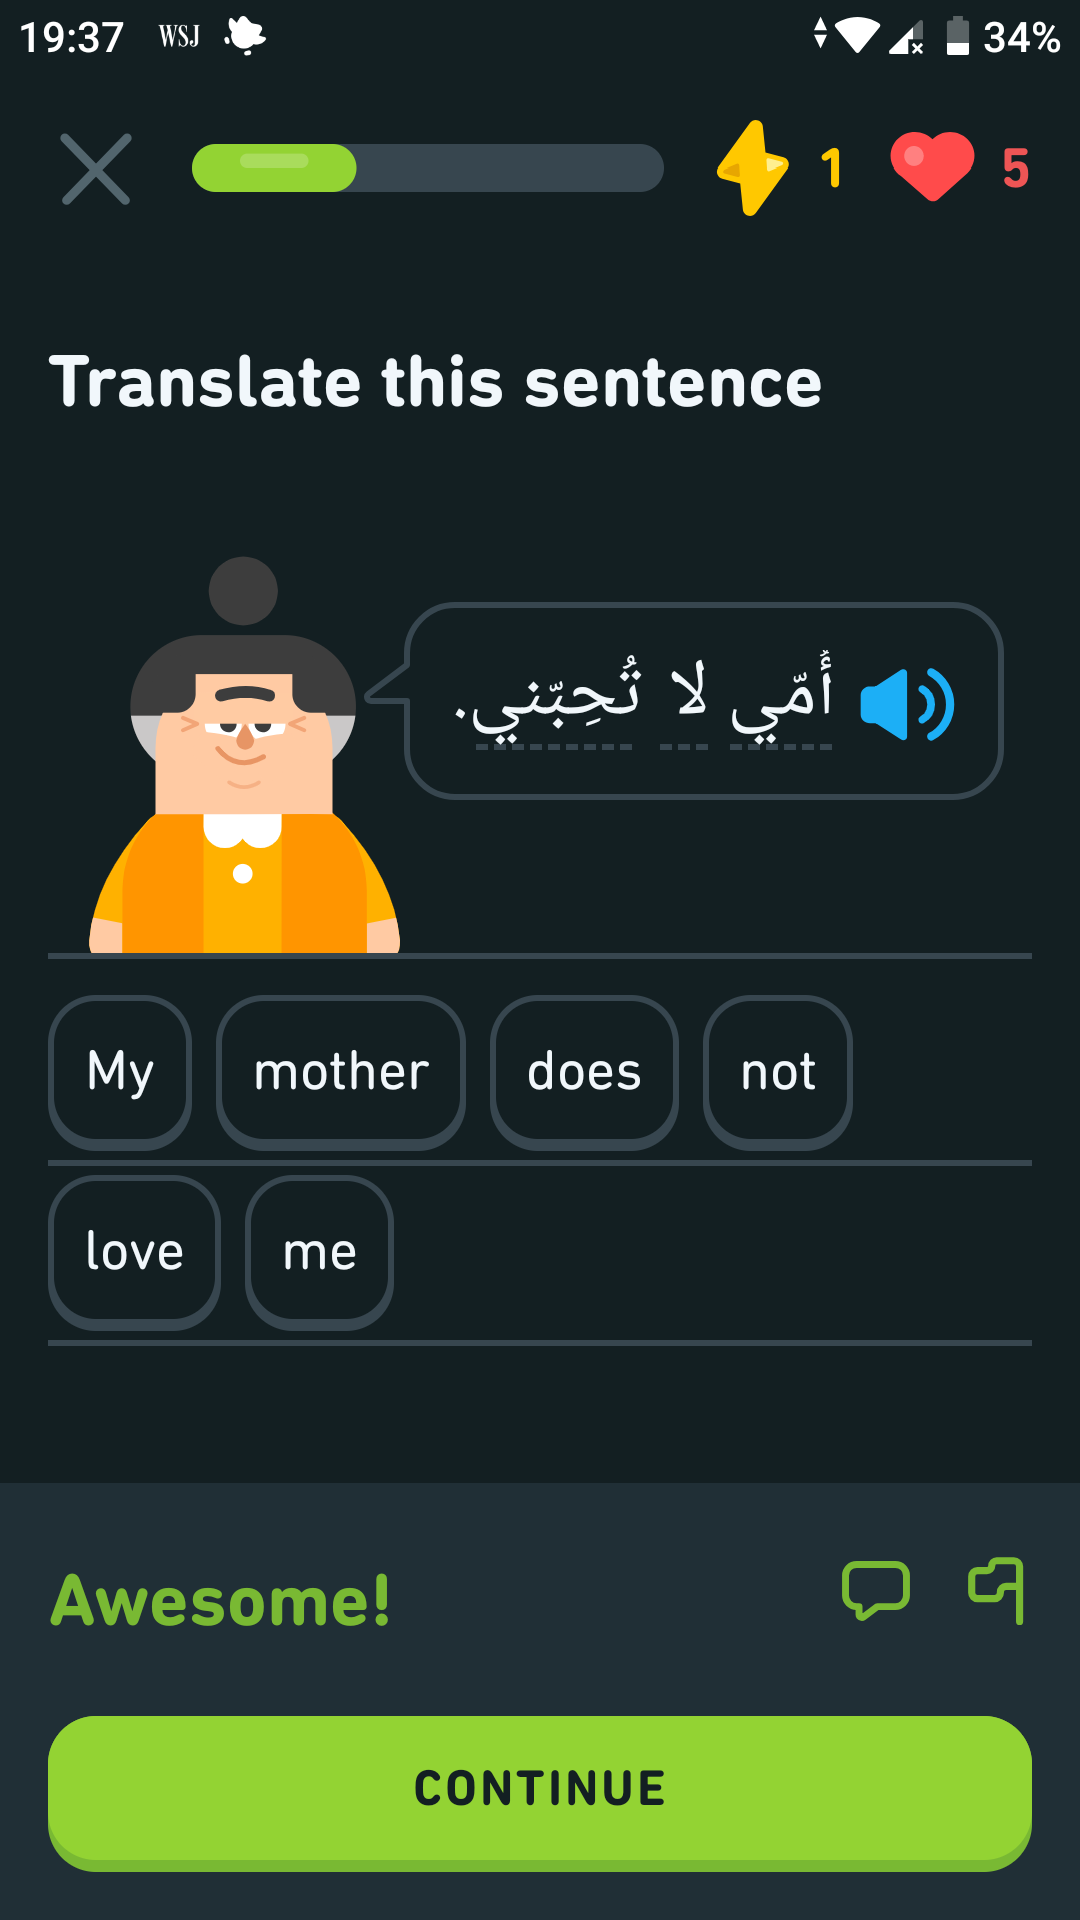 duolingo lesson in arabic.  phrase is "my mother does not love me."